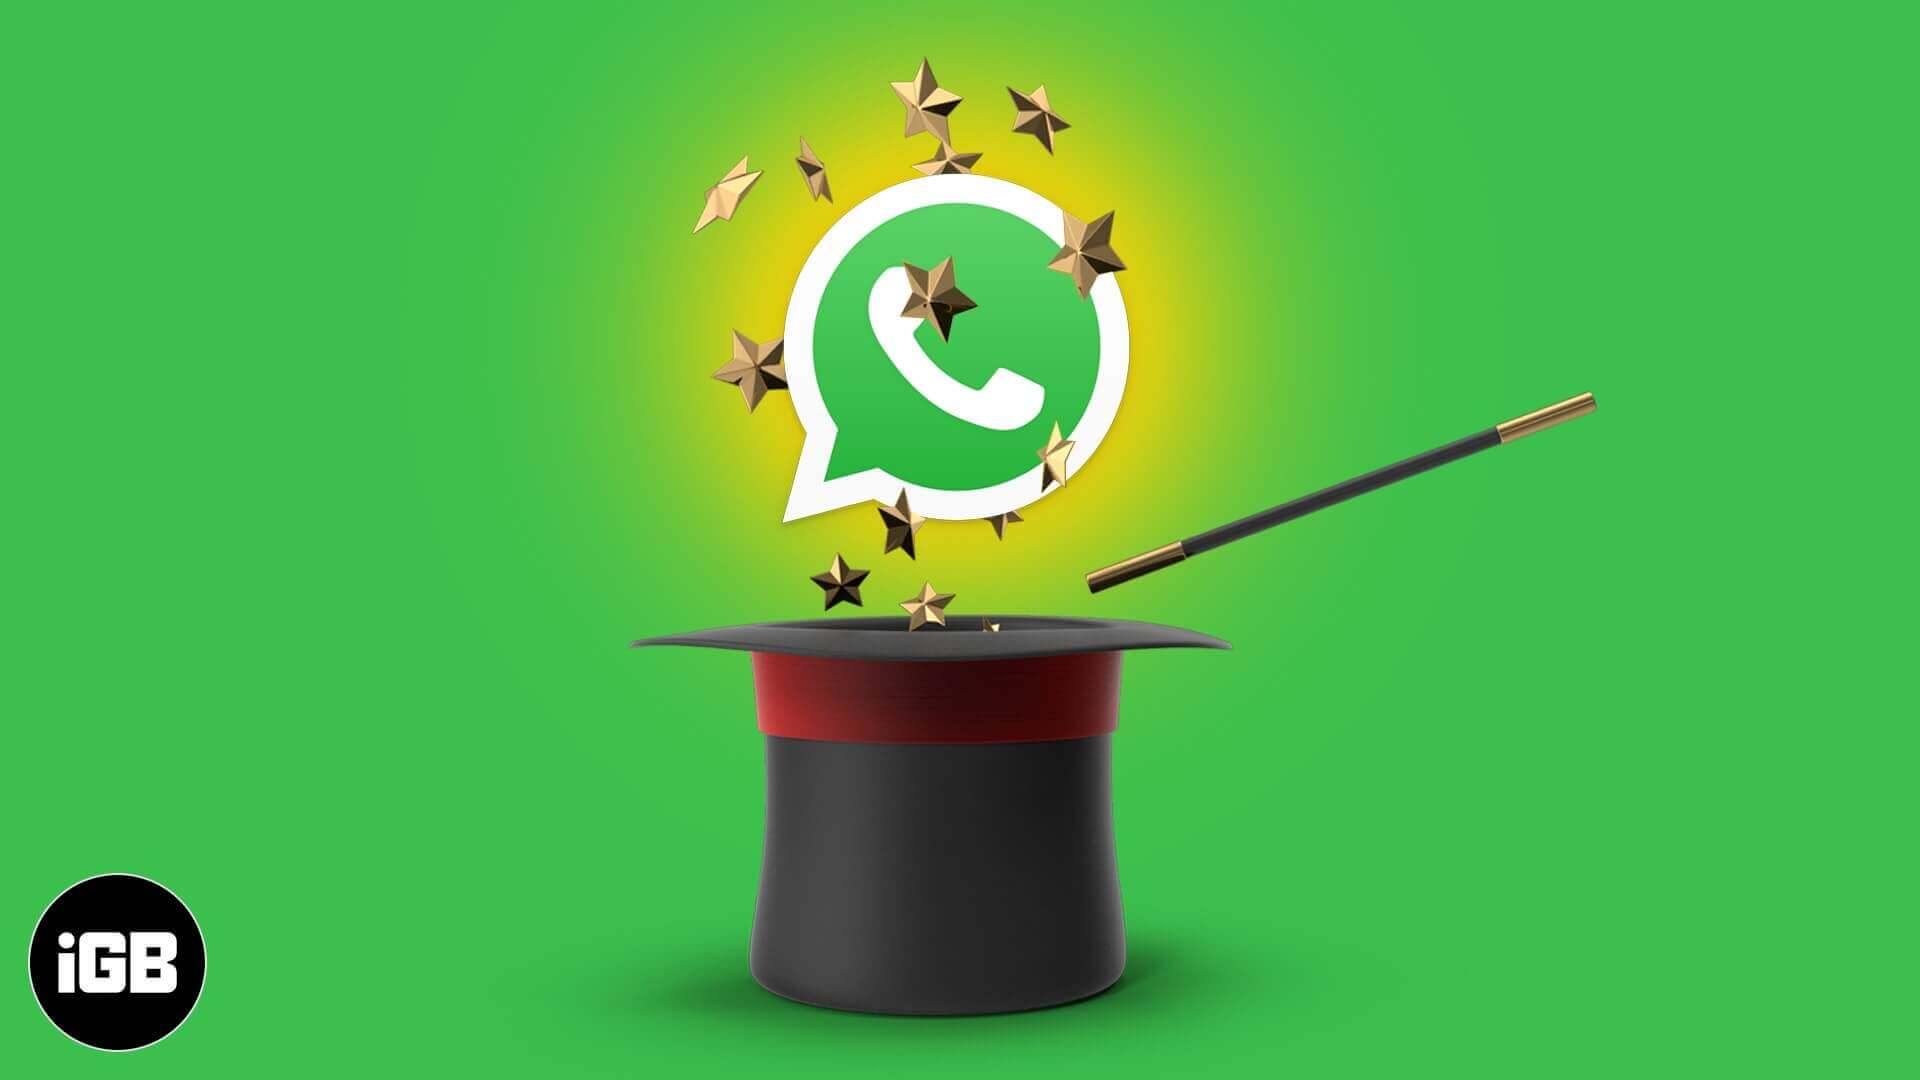 Whatsapp tips and tricks for iphone